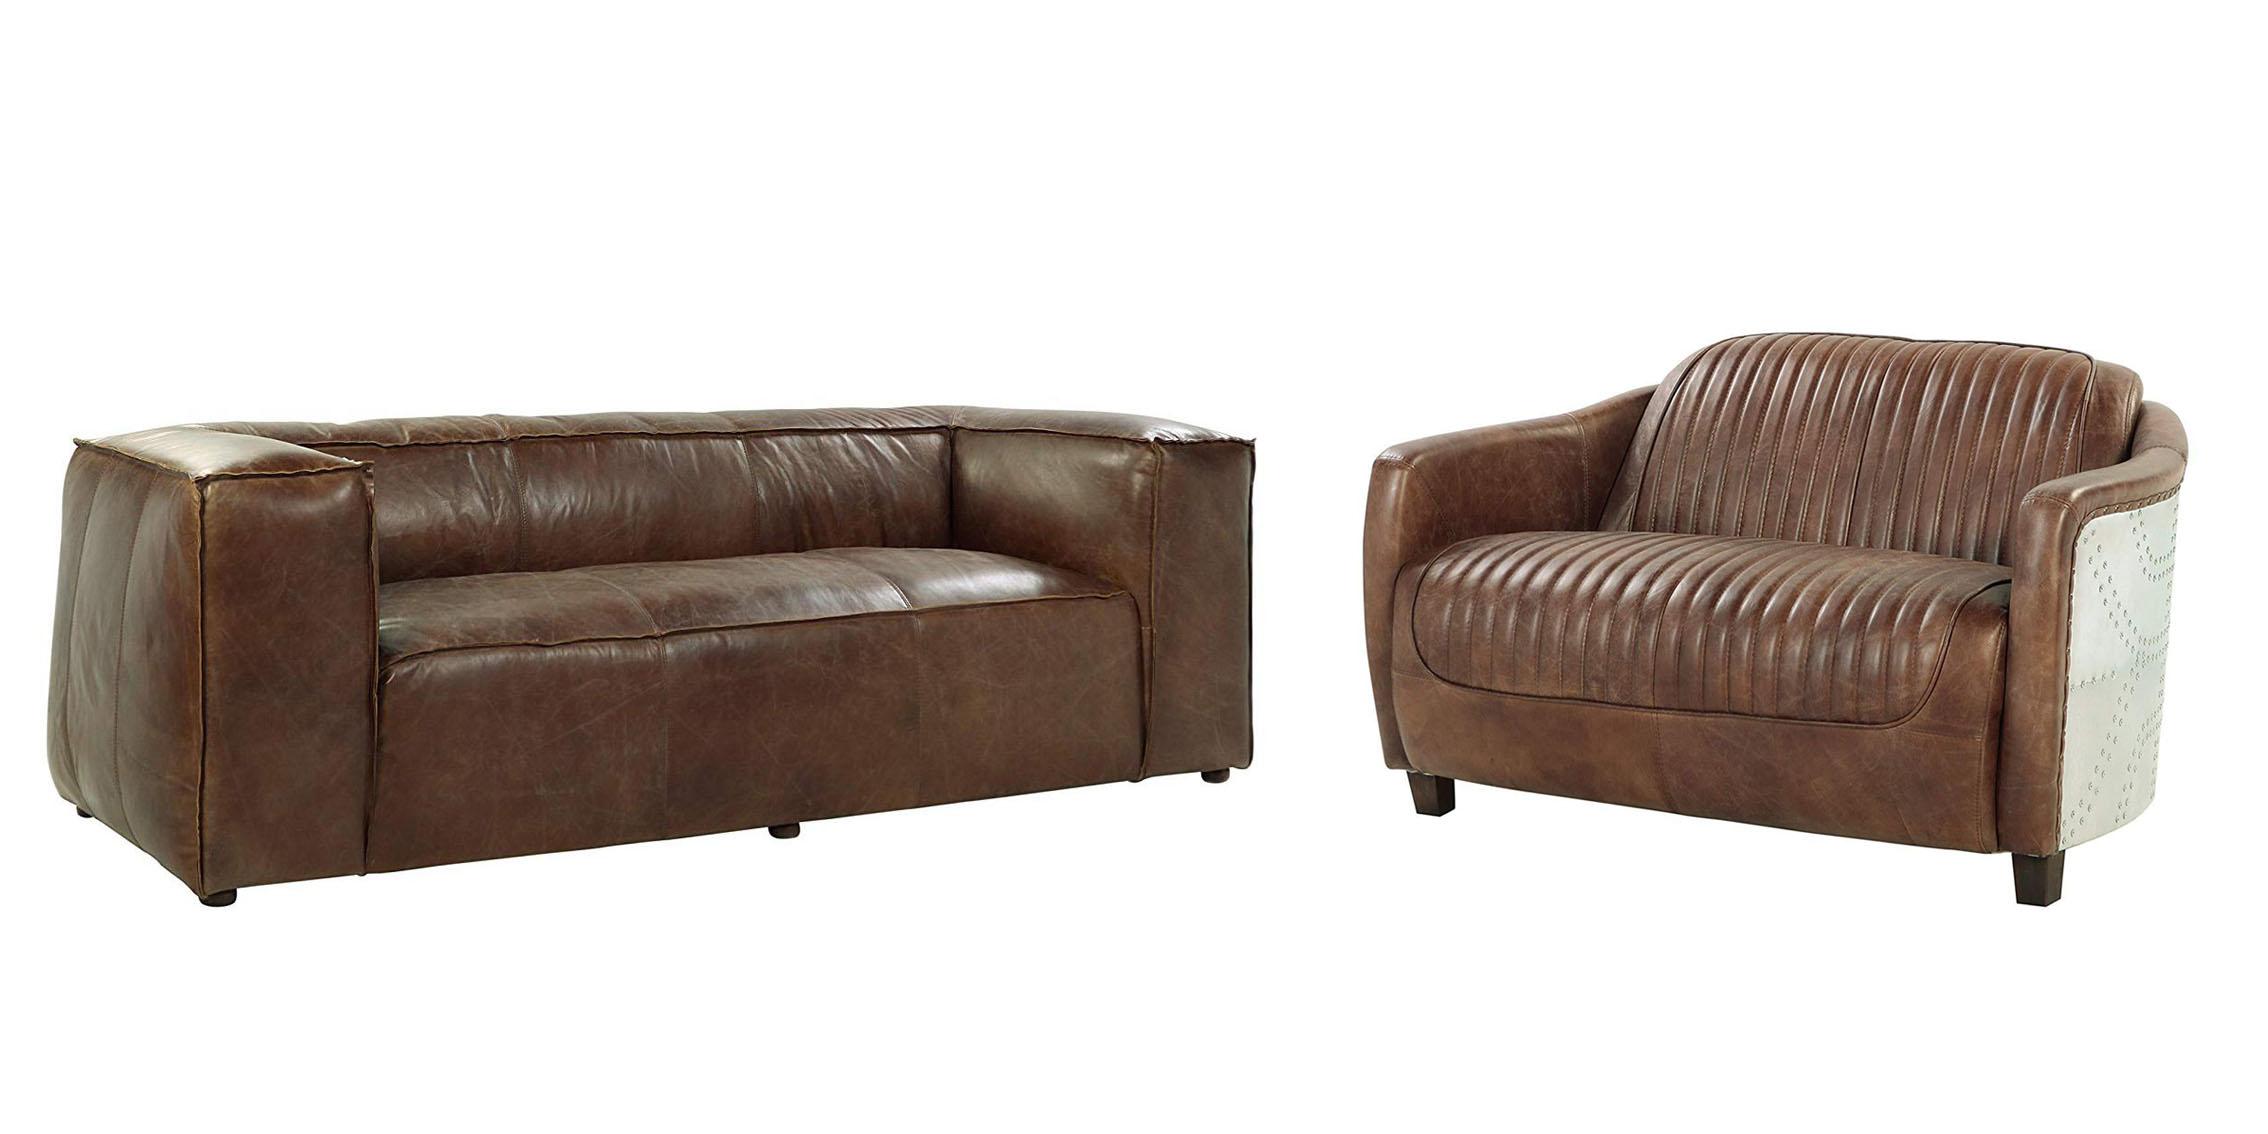 Casual, Transitional Sofa and Loveseat Set Brancaster-53545 - 53546 53545-2PC in Brown Geniune Leather